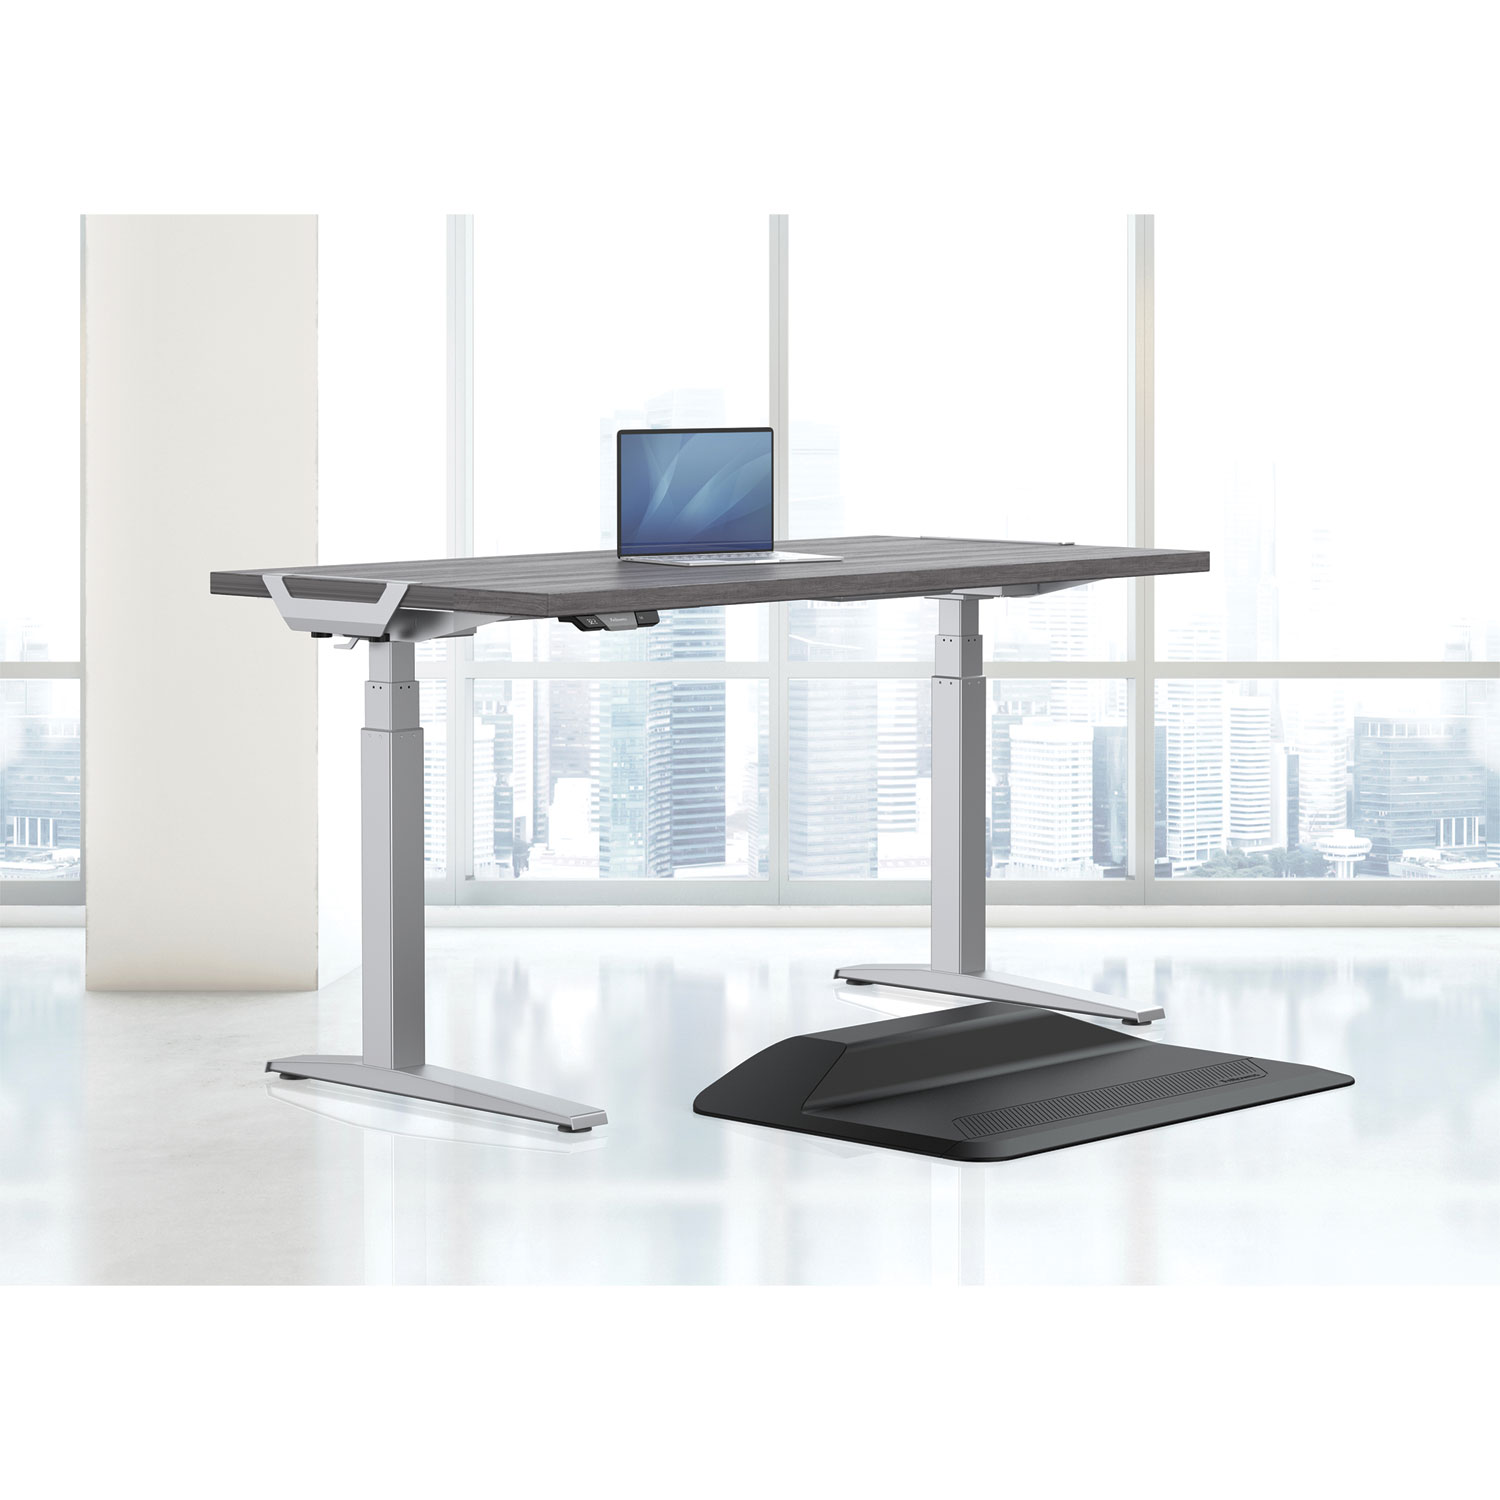  Fellowes 9650101 Levado Laminate Table Top (Top Only), 60w x 30d, Gray Ash (FEL9650101) 